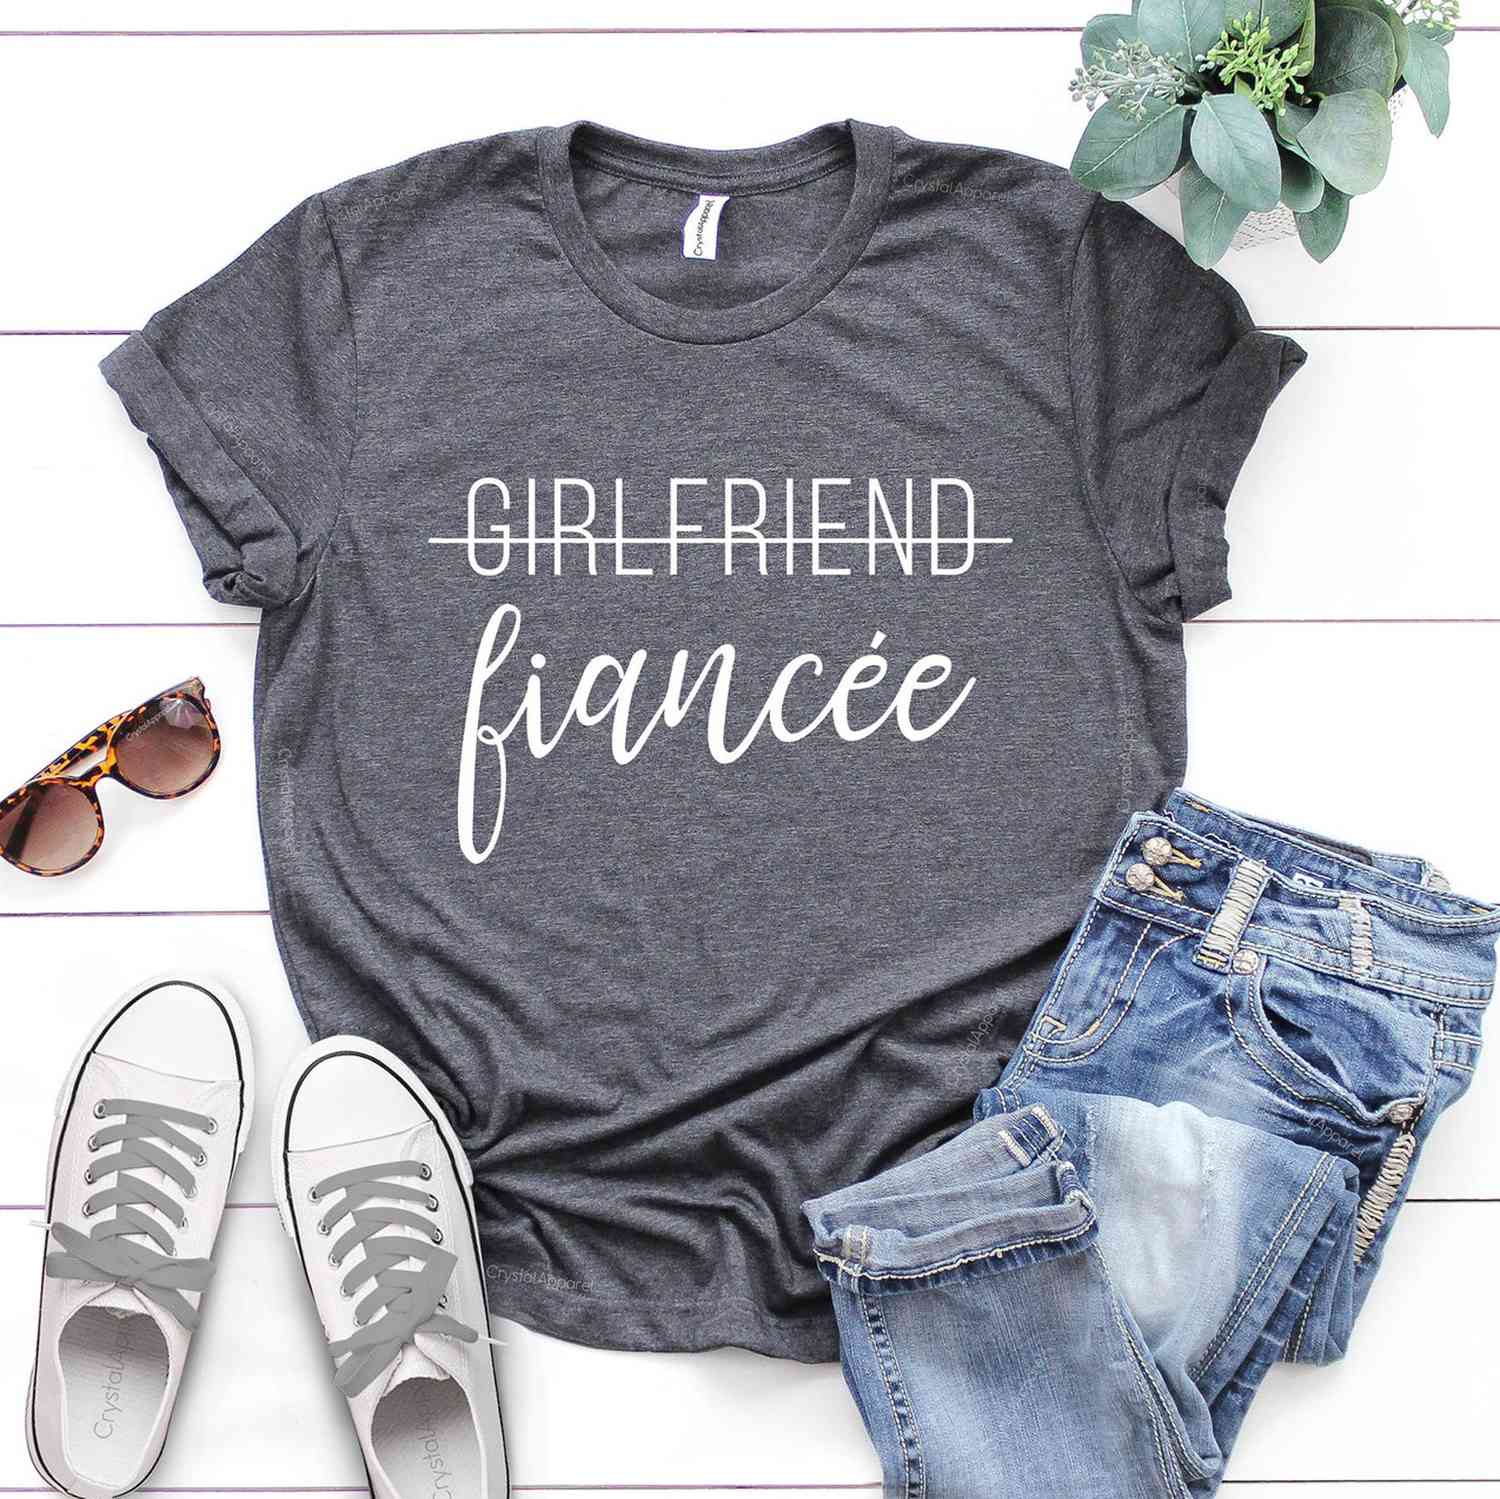 Engagement Gifts Girlfriend to Fiancee t-shirt from etsy